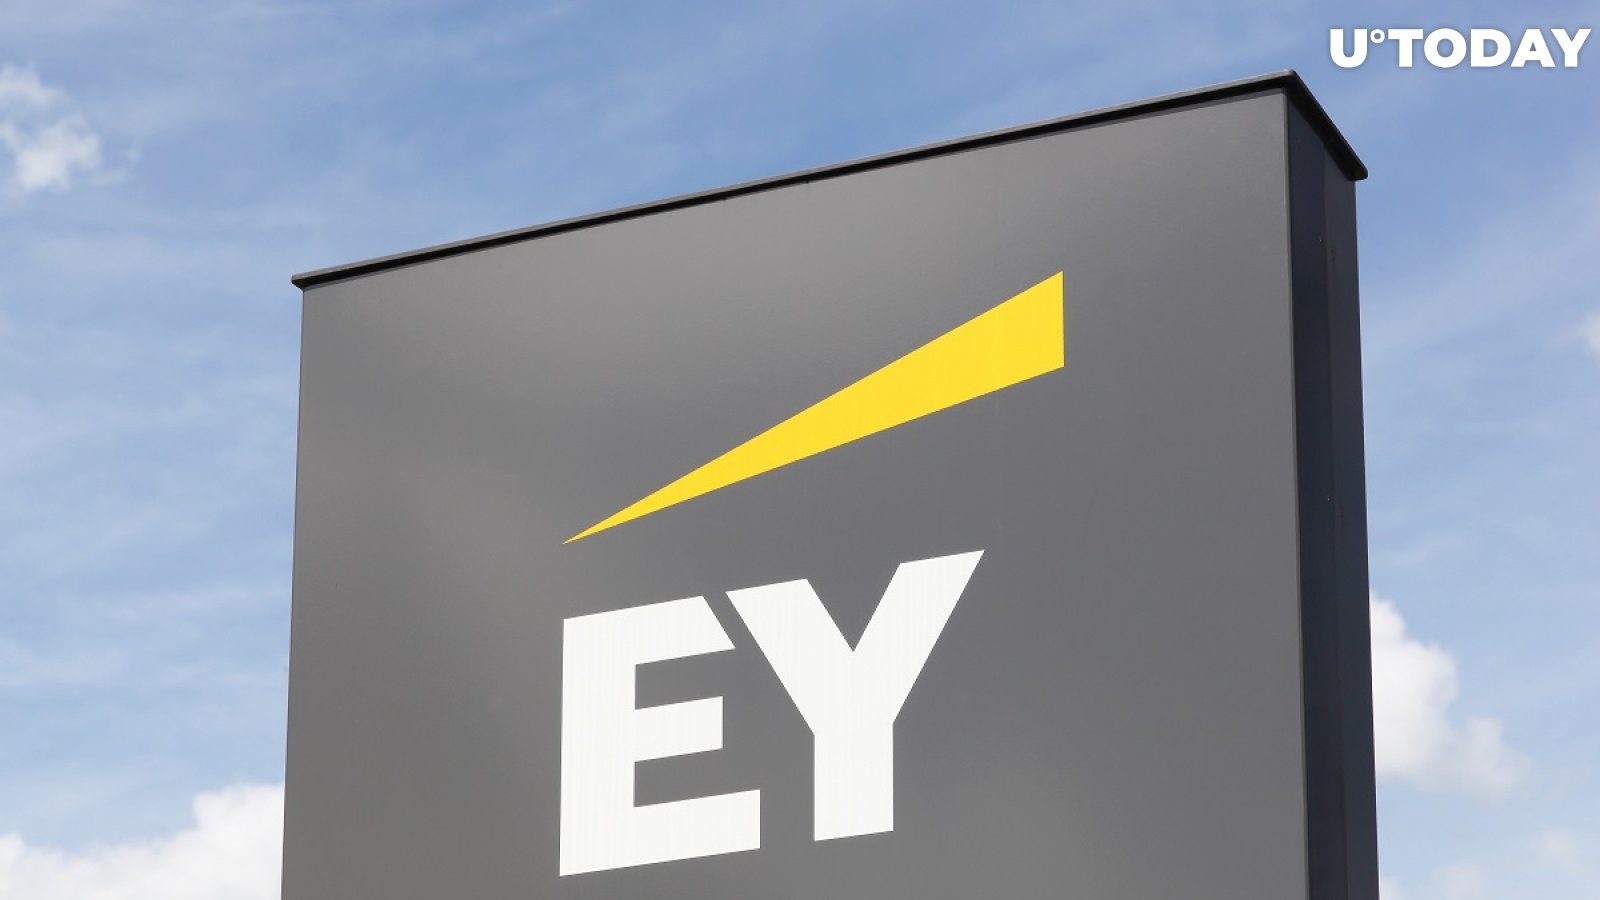 Accounting Giant Ernst & Young Launches New Application for Calculating Cryptocurrency Taxes